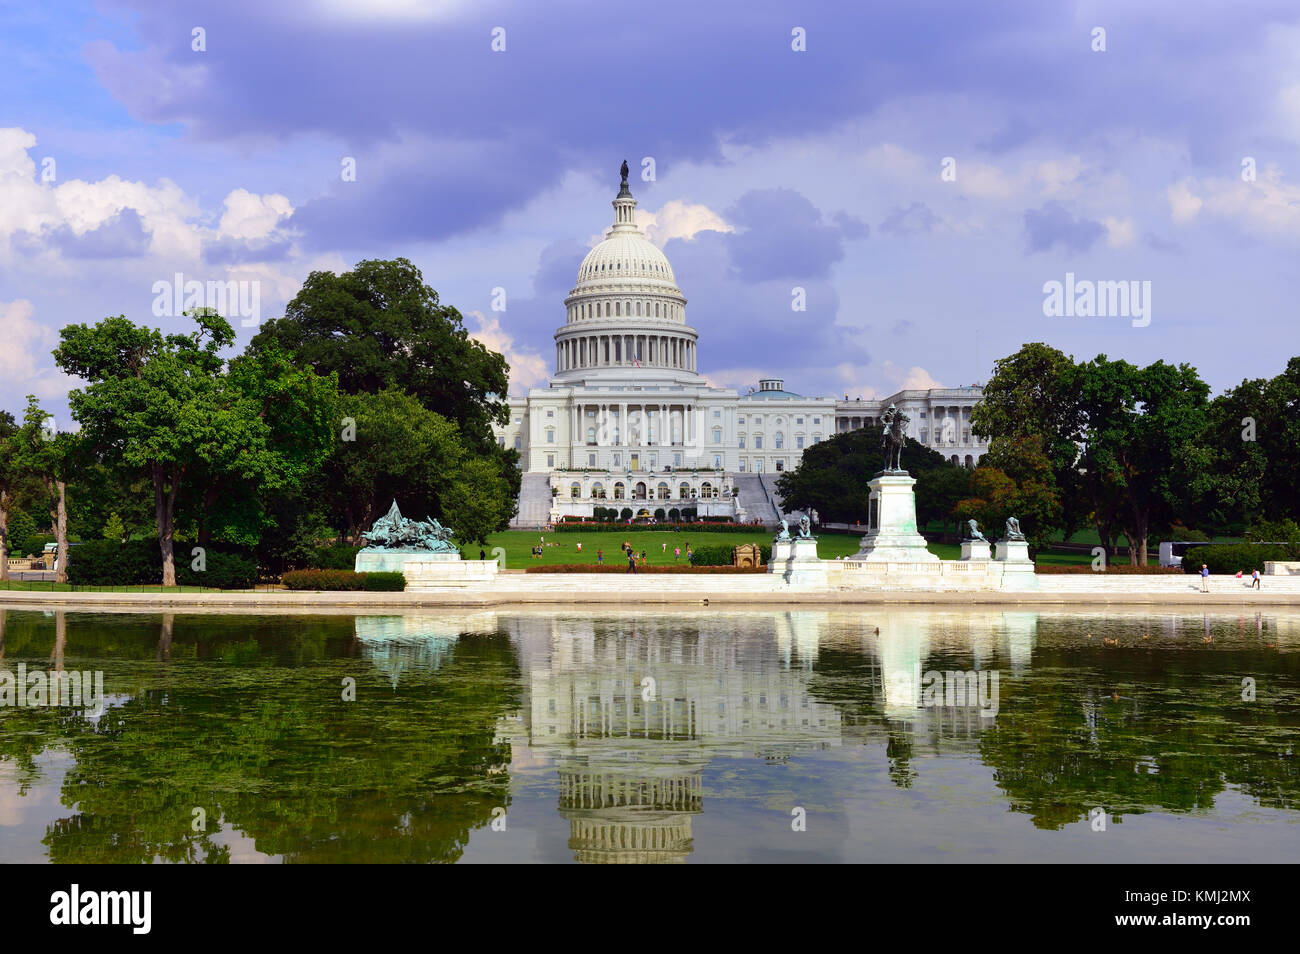 Congress building in Capitol Hill, Washington DC with stormy sky and water reflections. Stock Photo